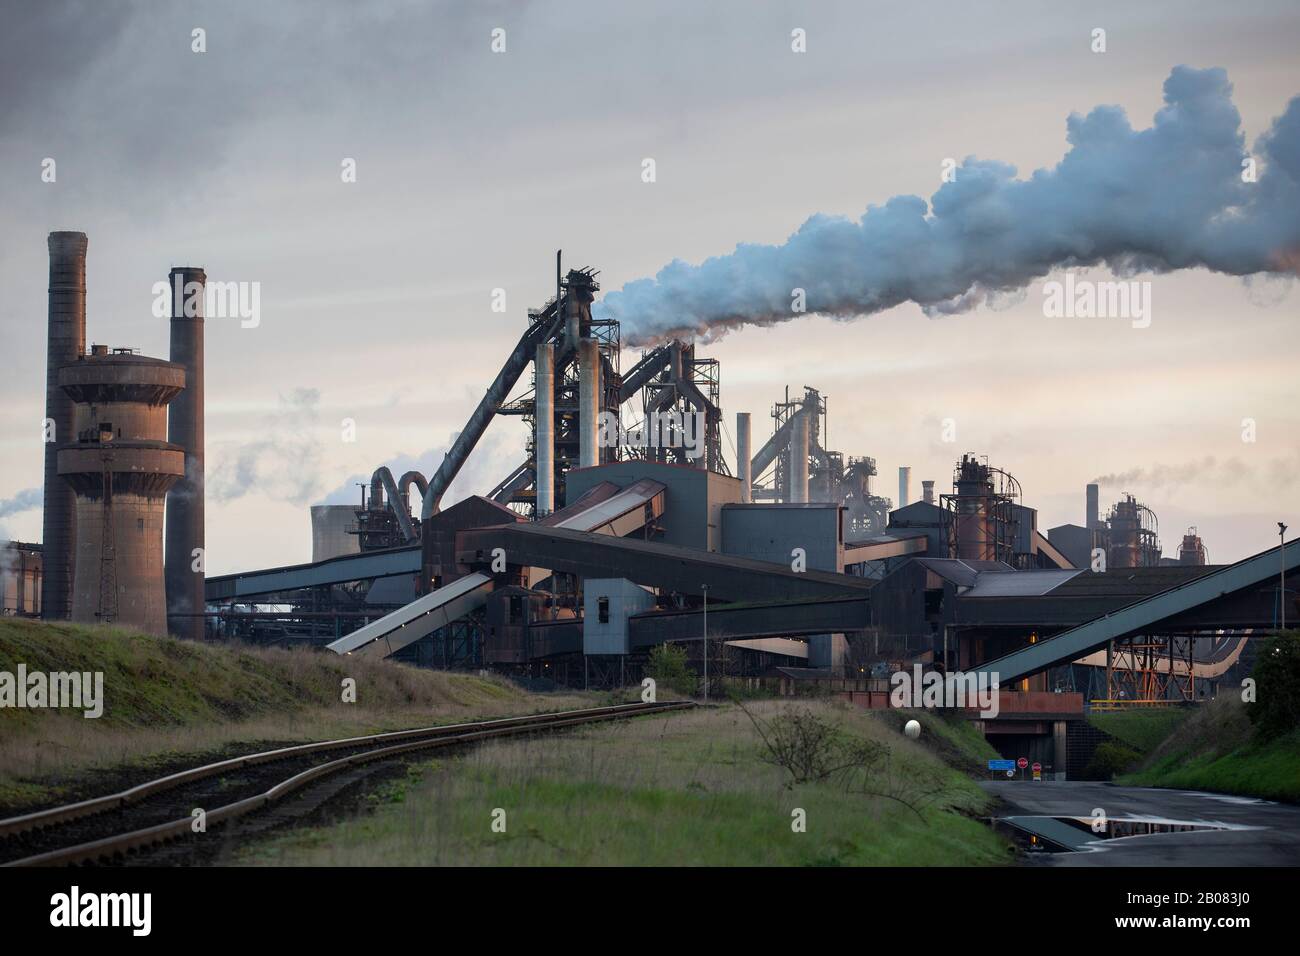 British Steel plant and works in Scunthorpe UK Stock Photo